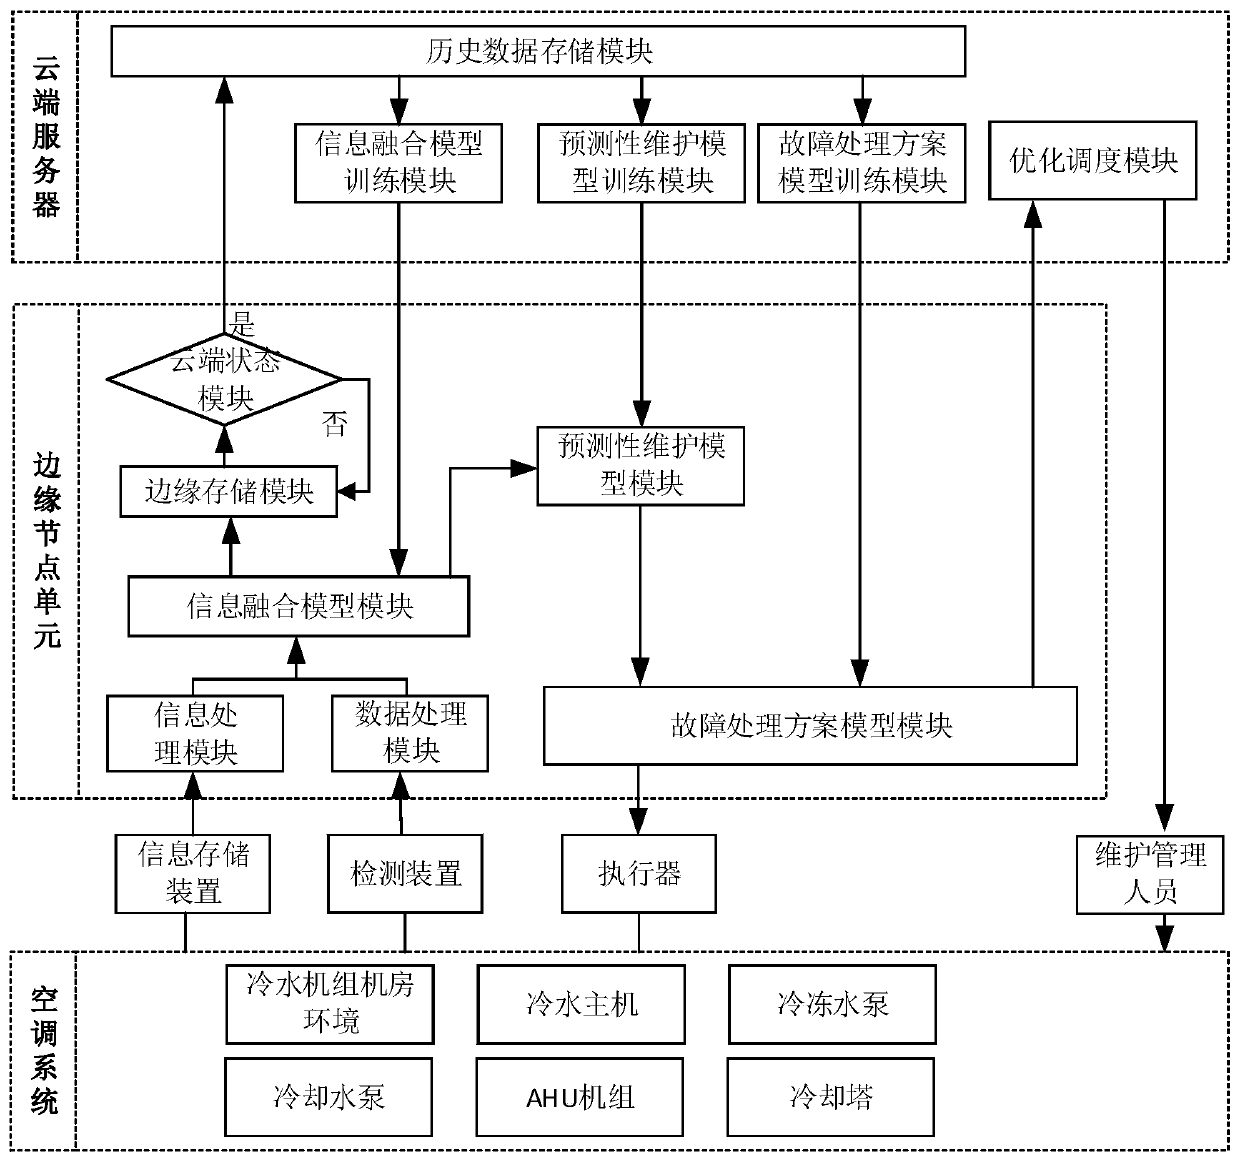 Subway station air conditioner predictive operation and maintenance management method and system